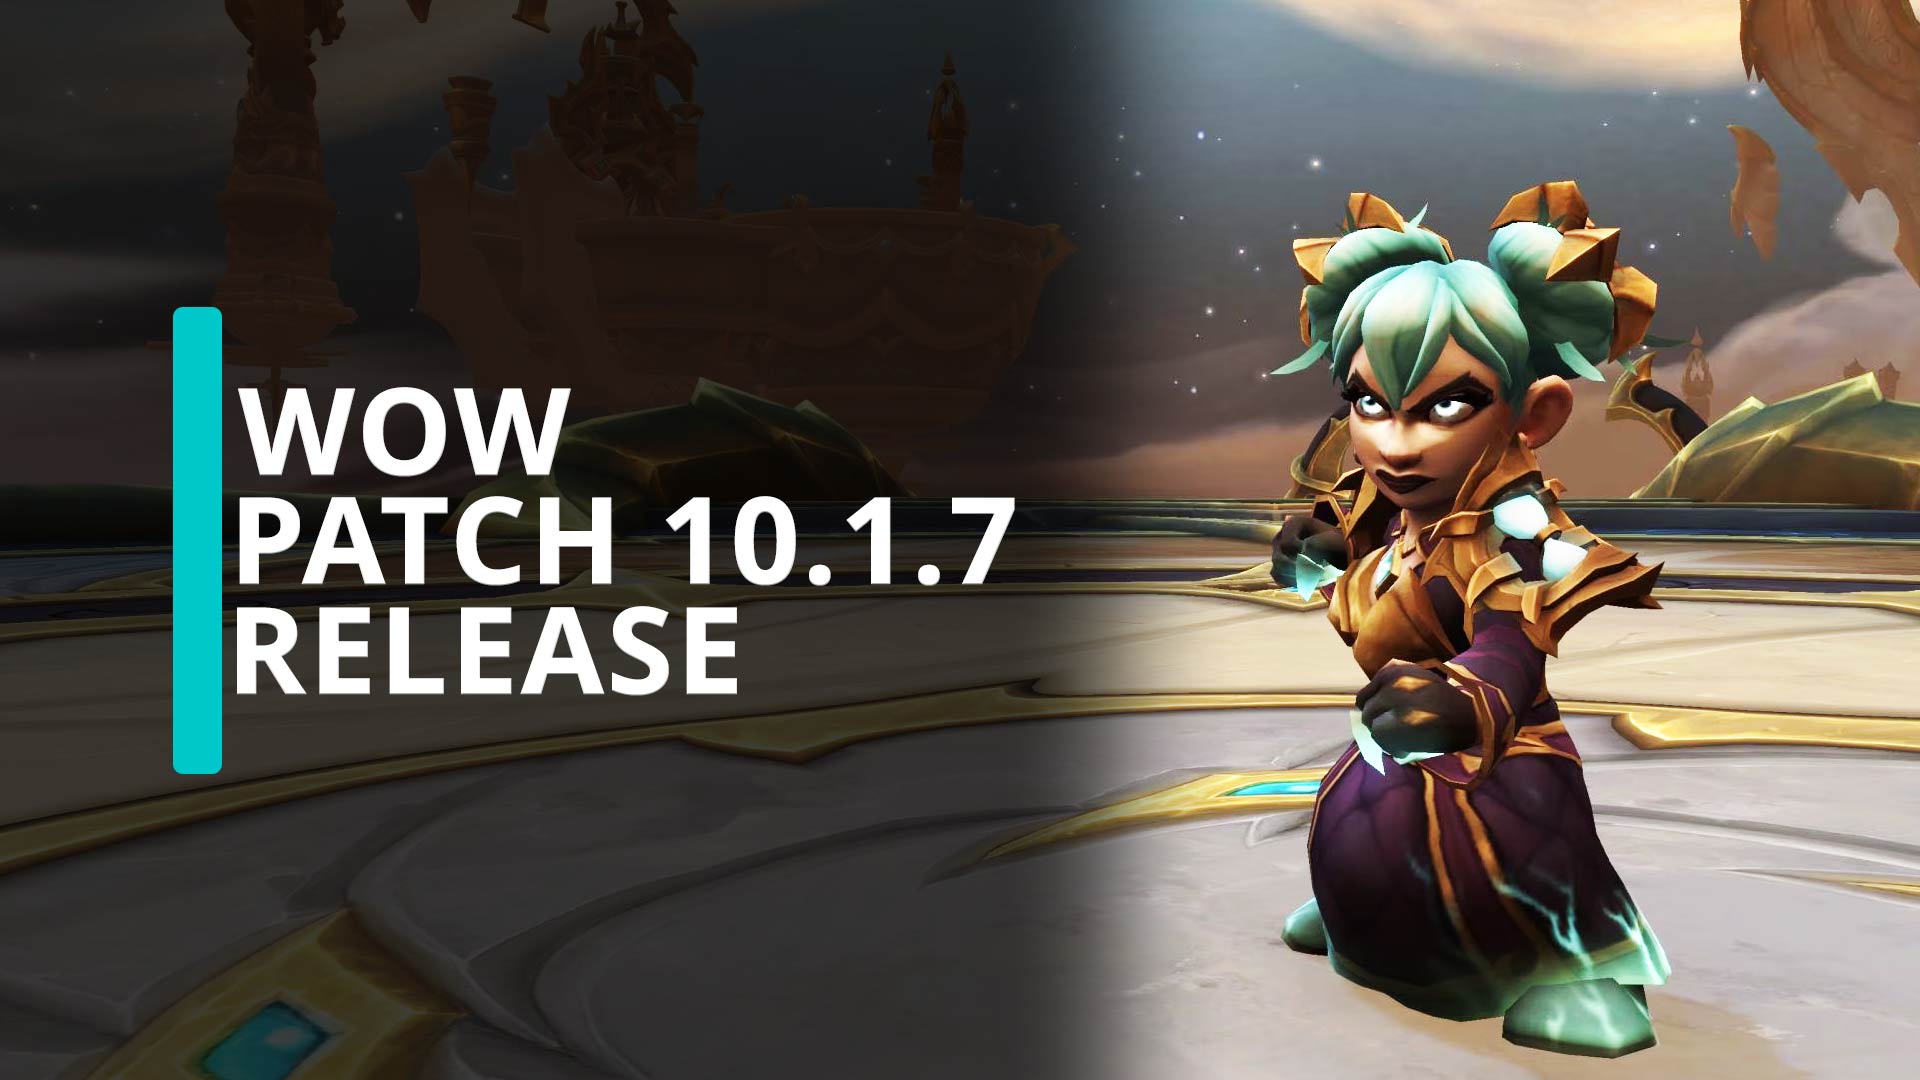 WoW Patch 10.1.7 Release-Datum